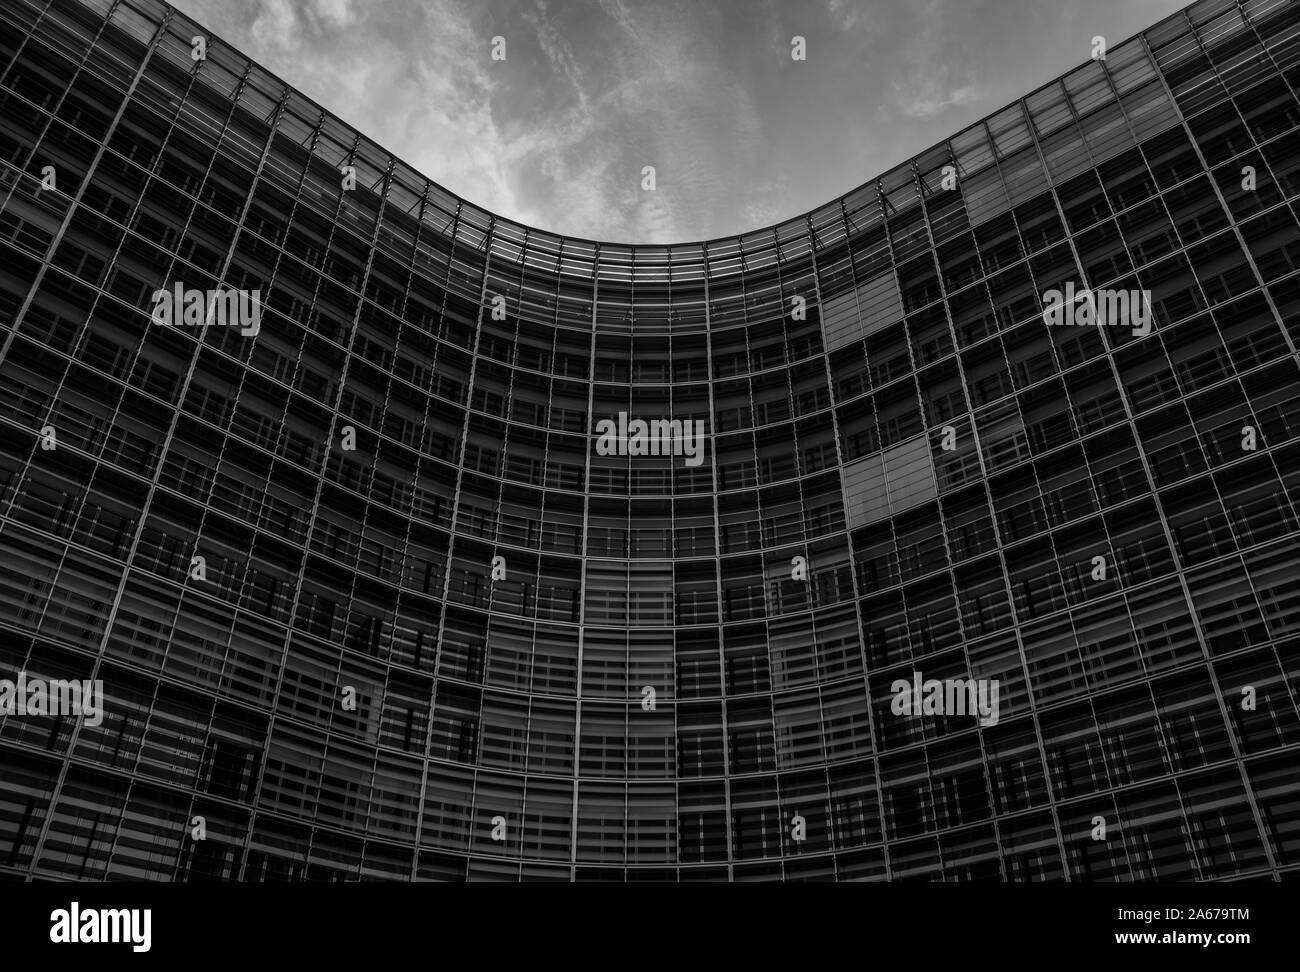 A black and white picture of the Le Berlaymont building (Brussels). Stock Photo